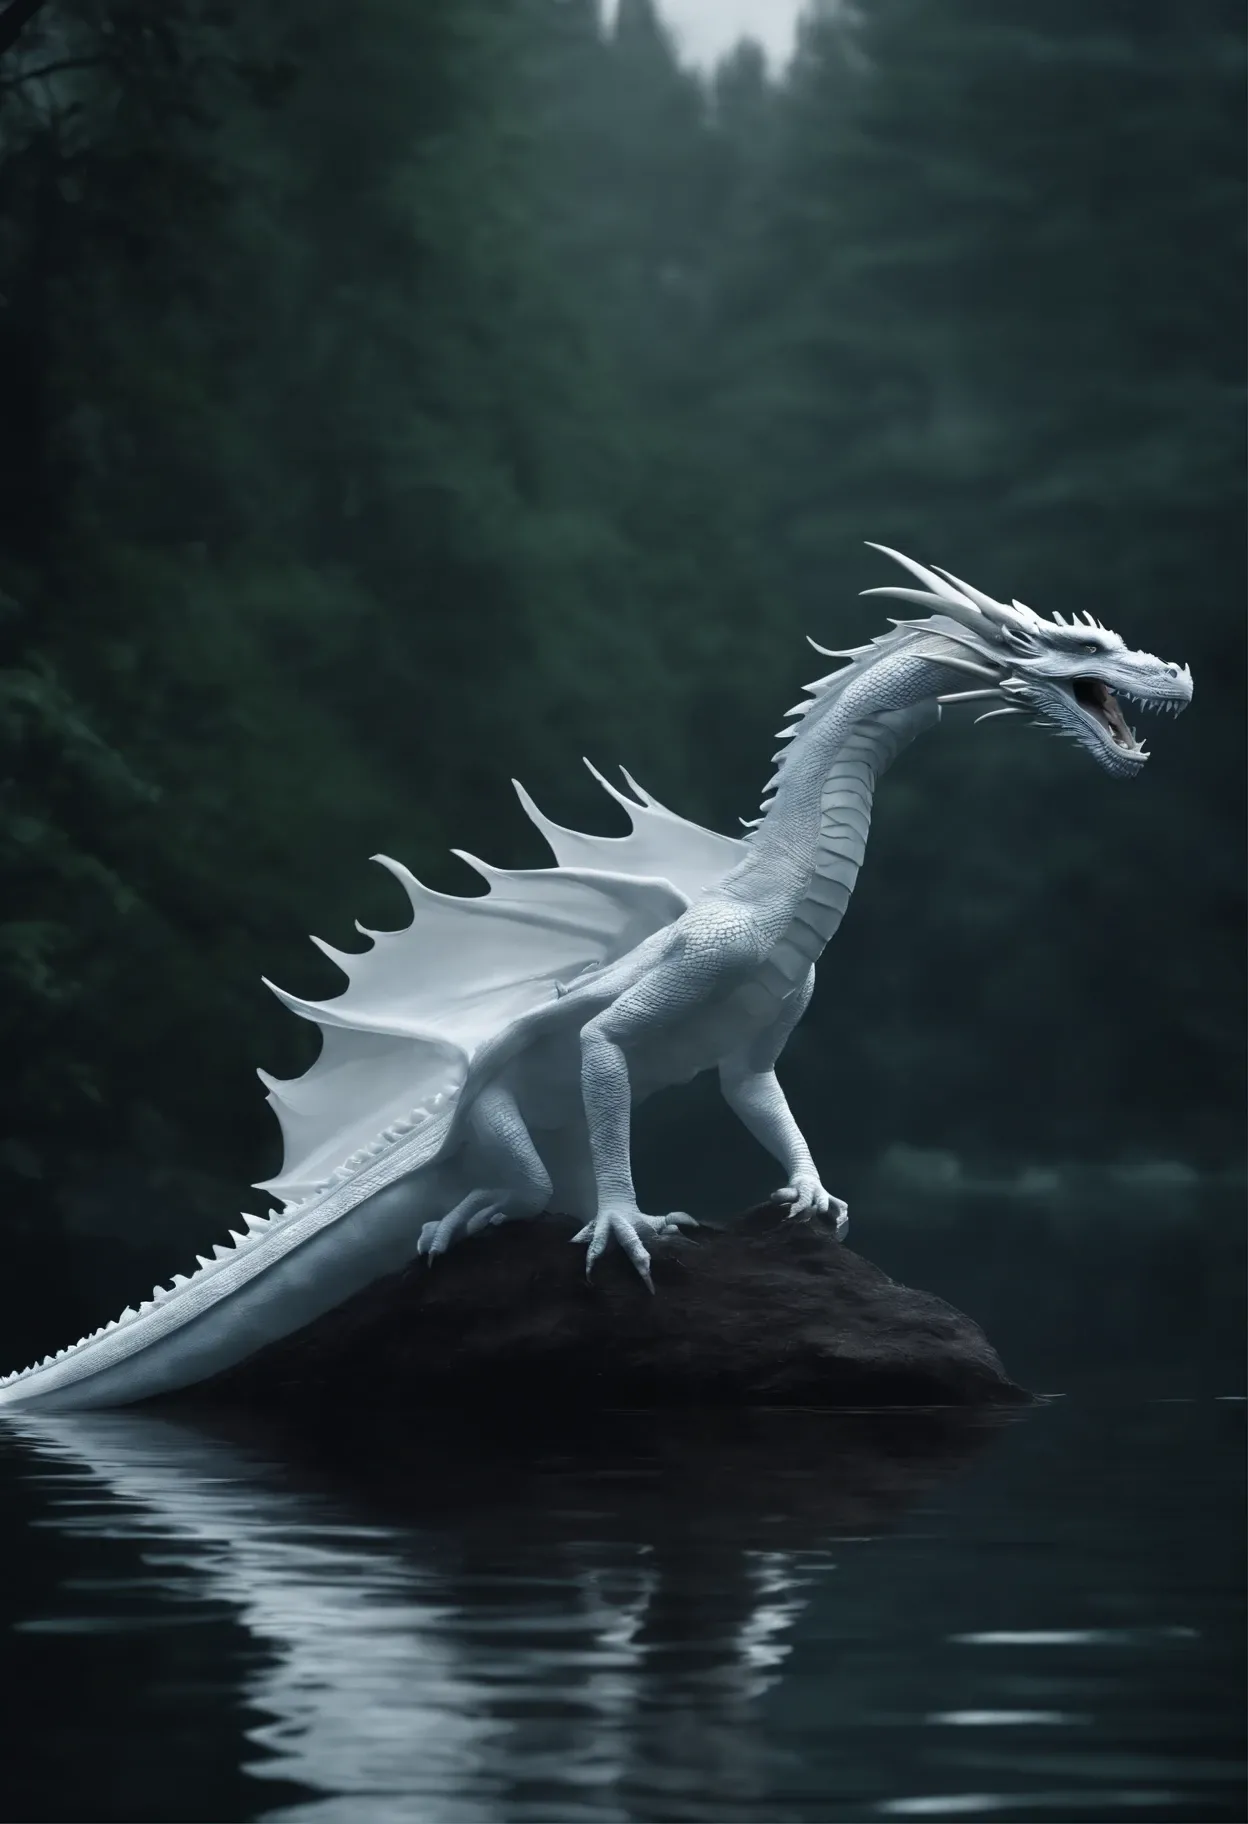 Masterpiece,4k realism, ((((1white dragon, lake and water, Best quality, Masterpiece, Ultra-high resolution, (photograph realistic:1.4), surrealism, Dream-like,fusionart, Shadowdancer, shadow magic, darkness control, stealth, shadowstep, umbral spells, hidden blade,,)),,), digital art, hyper-realistic 8K